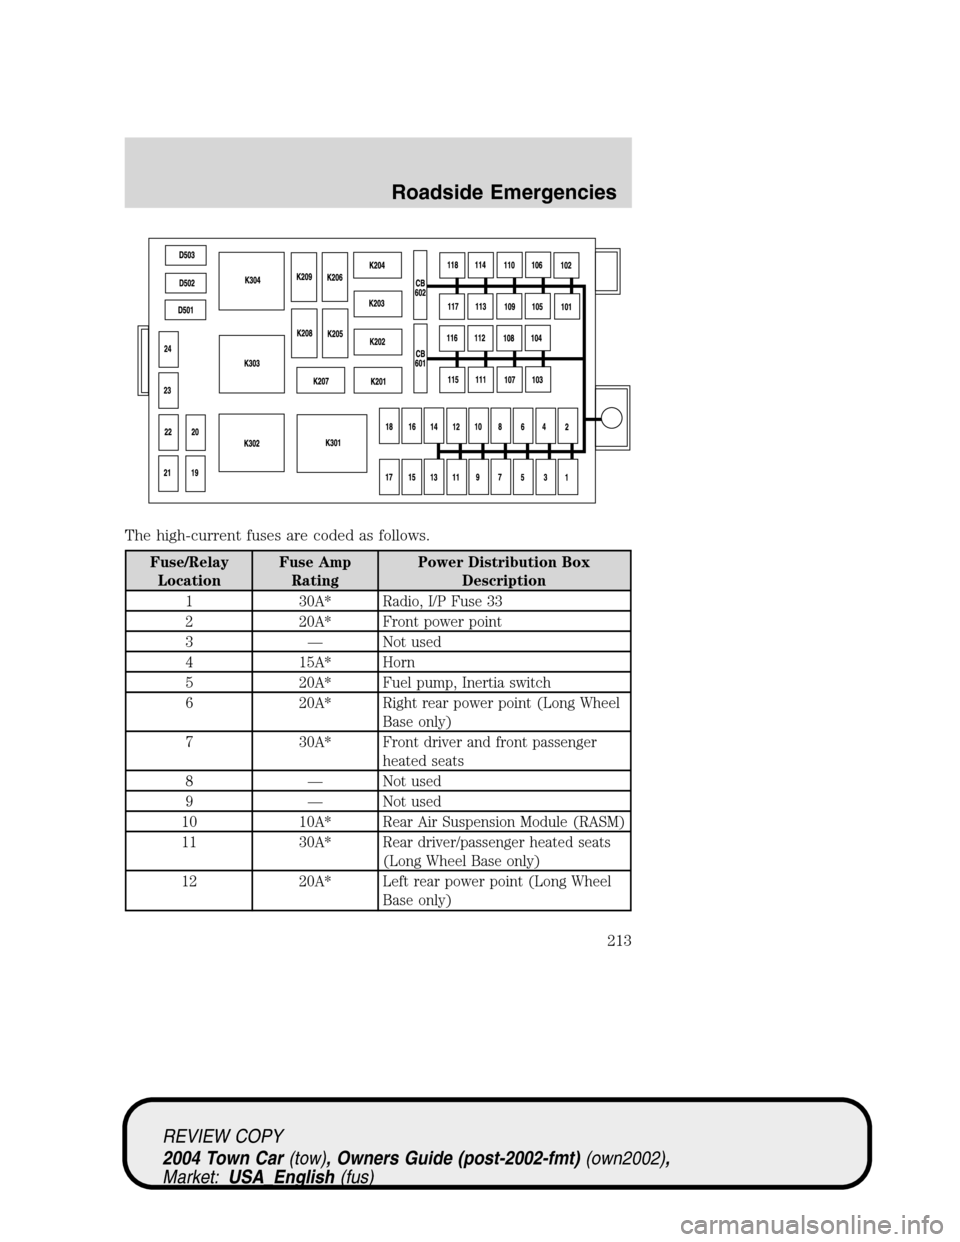 LINCOLN TOWN CAR 2004  Owners Manual The high-current fuses are coded as follows.
Fuse/Relay
LocationFuse Amp
RatingPower Distribution Box
Description
1 30A* Radio, I/P Fuse 33
2 20A* Front power point
3—Not used
4 15A* Horn
5 20A* Fue